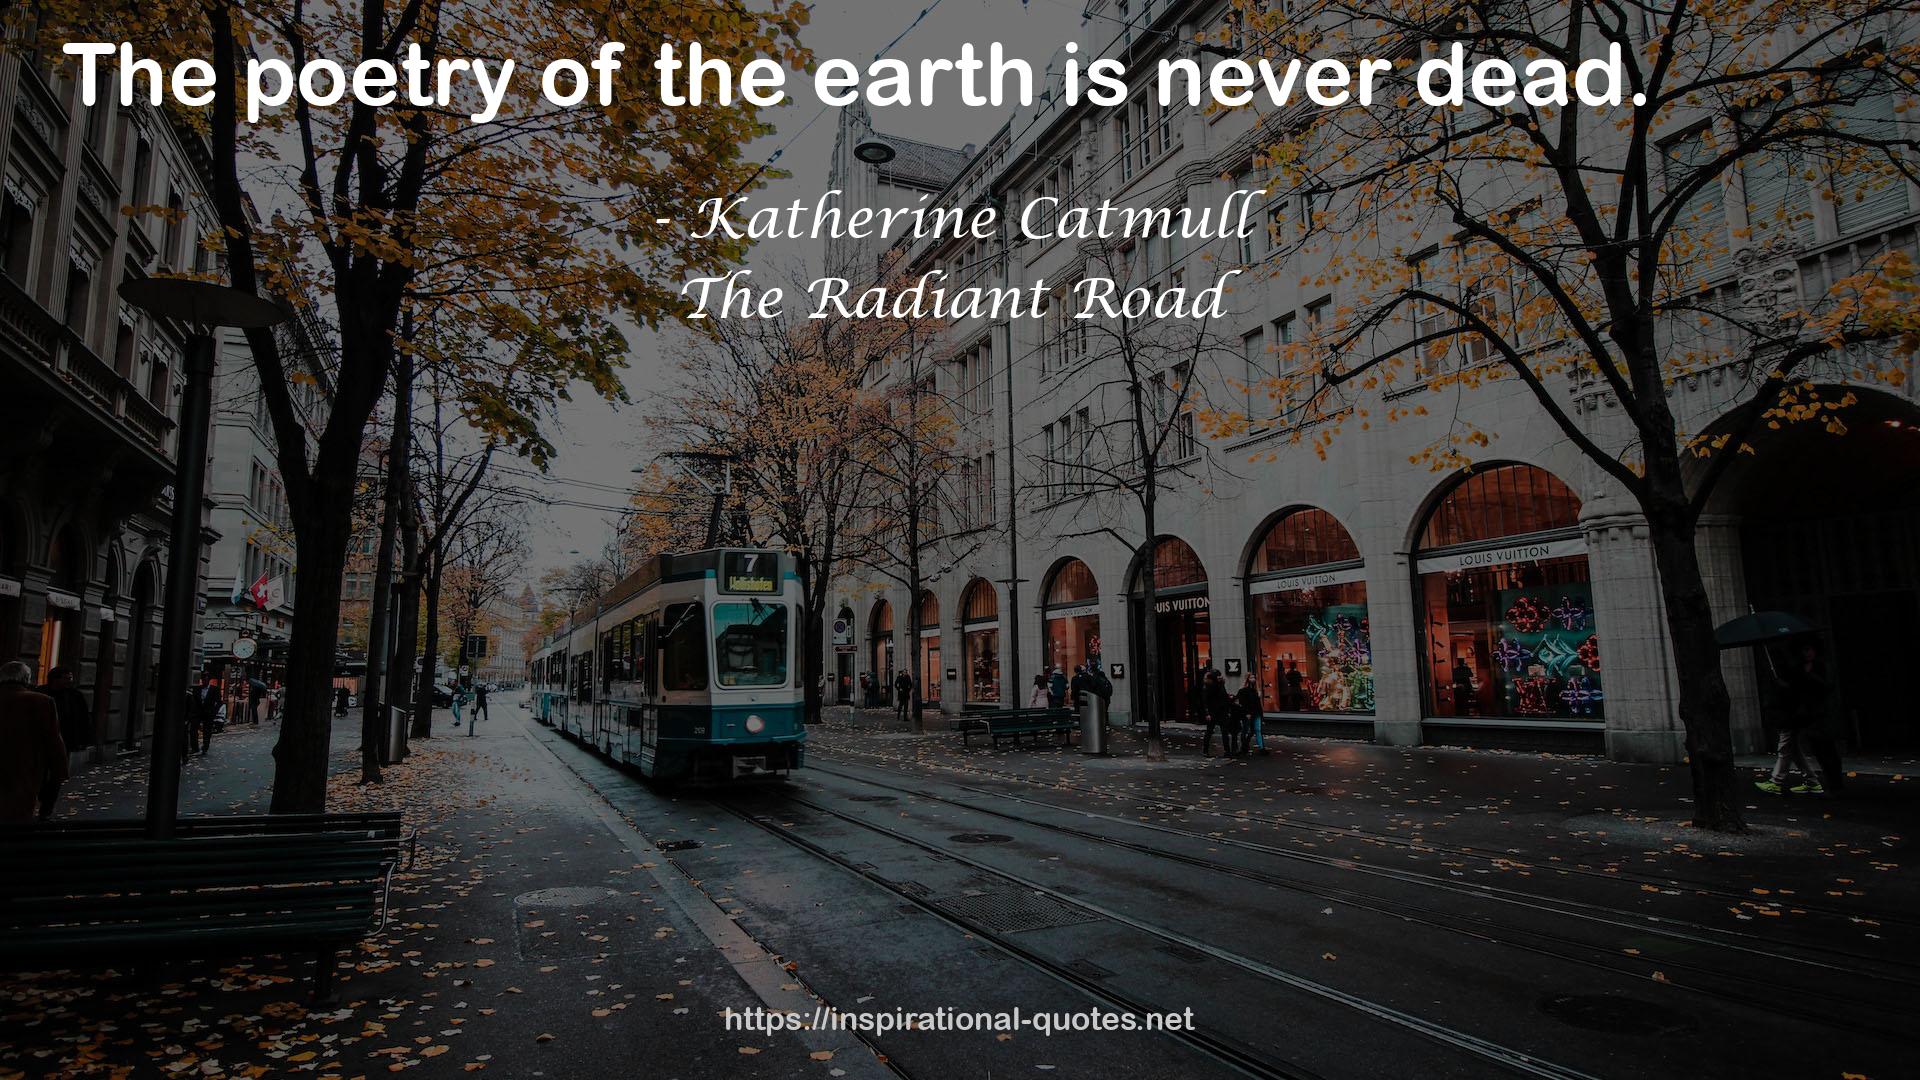 Katherine Catmull QUOTES